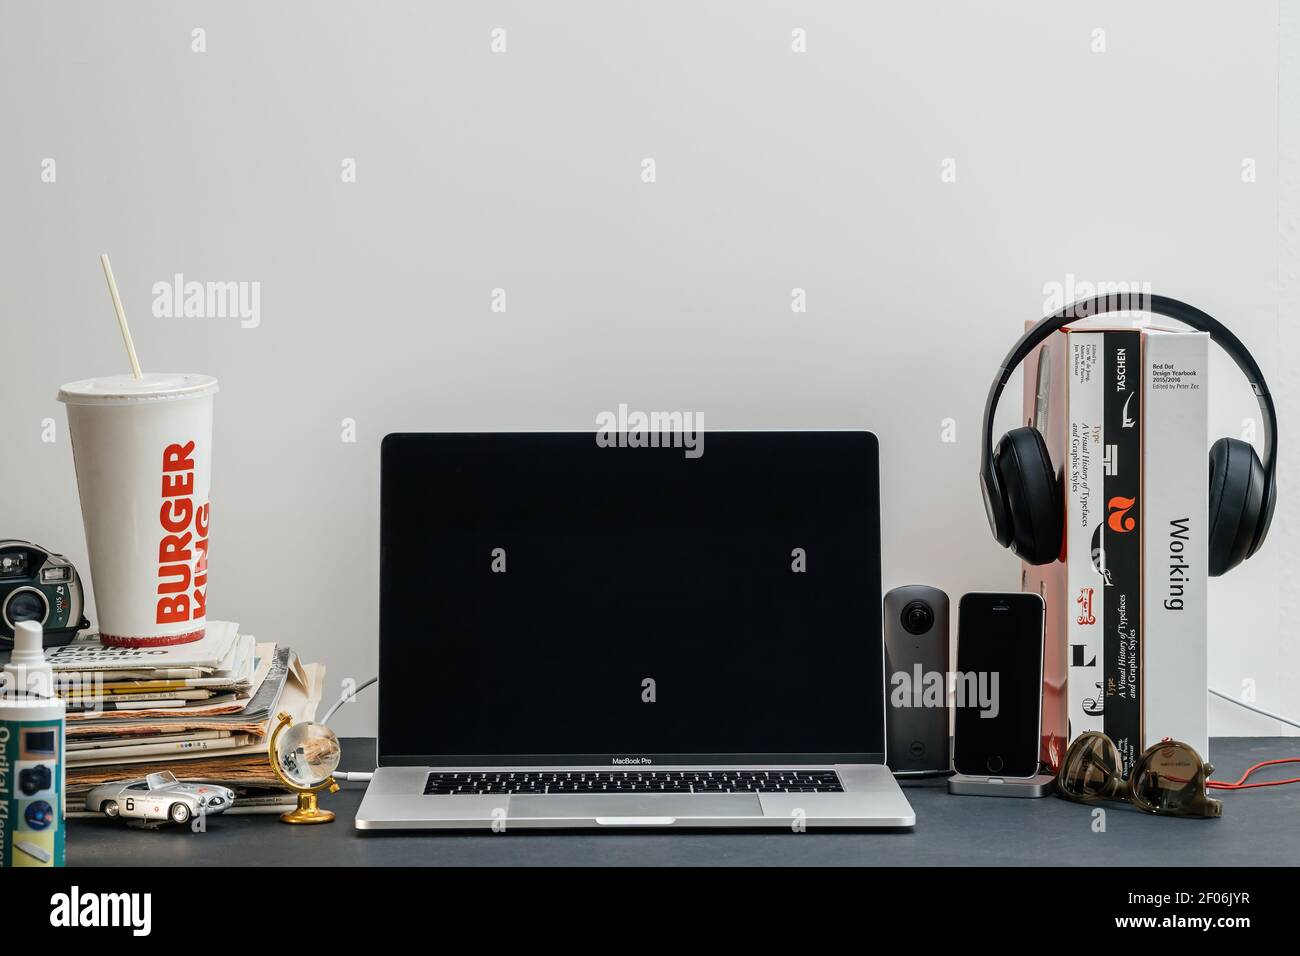 Paris, France - Sep 13, 2018: New Apple Computers MacBook Pro M1 M2 16 inch laptop in geek creative room environment with multiple design books, camera, smartphones and Dr Dre Beats Pro headphones Stock Photo